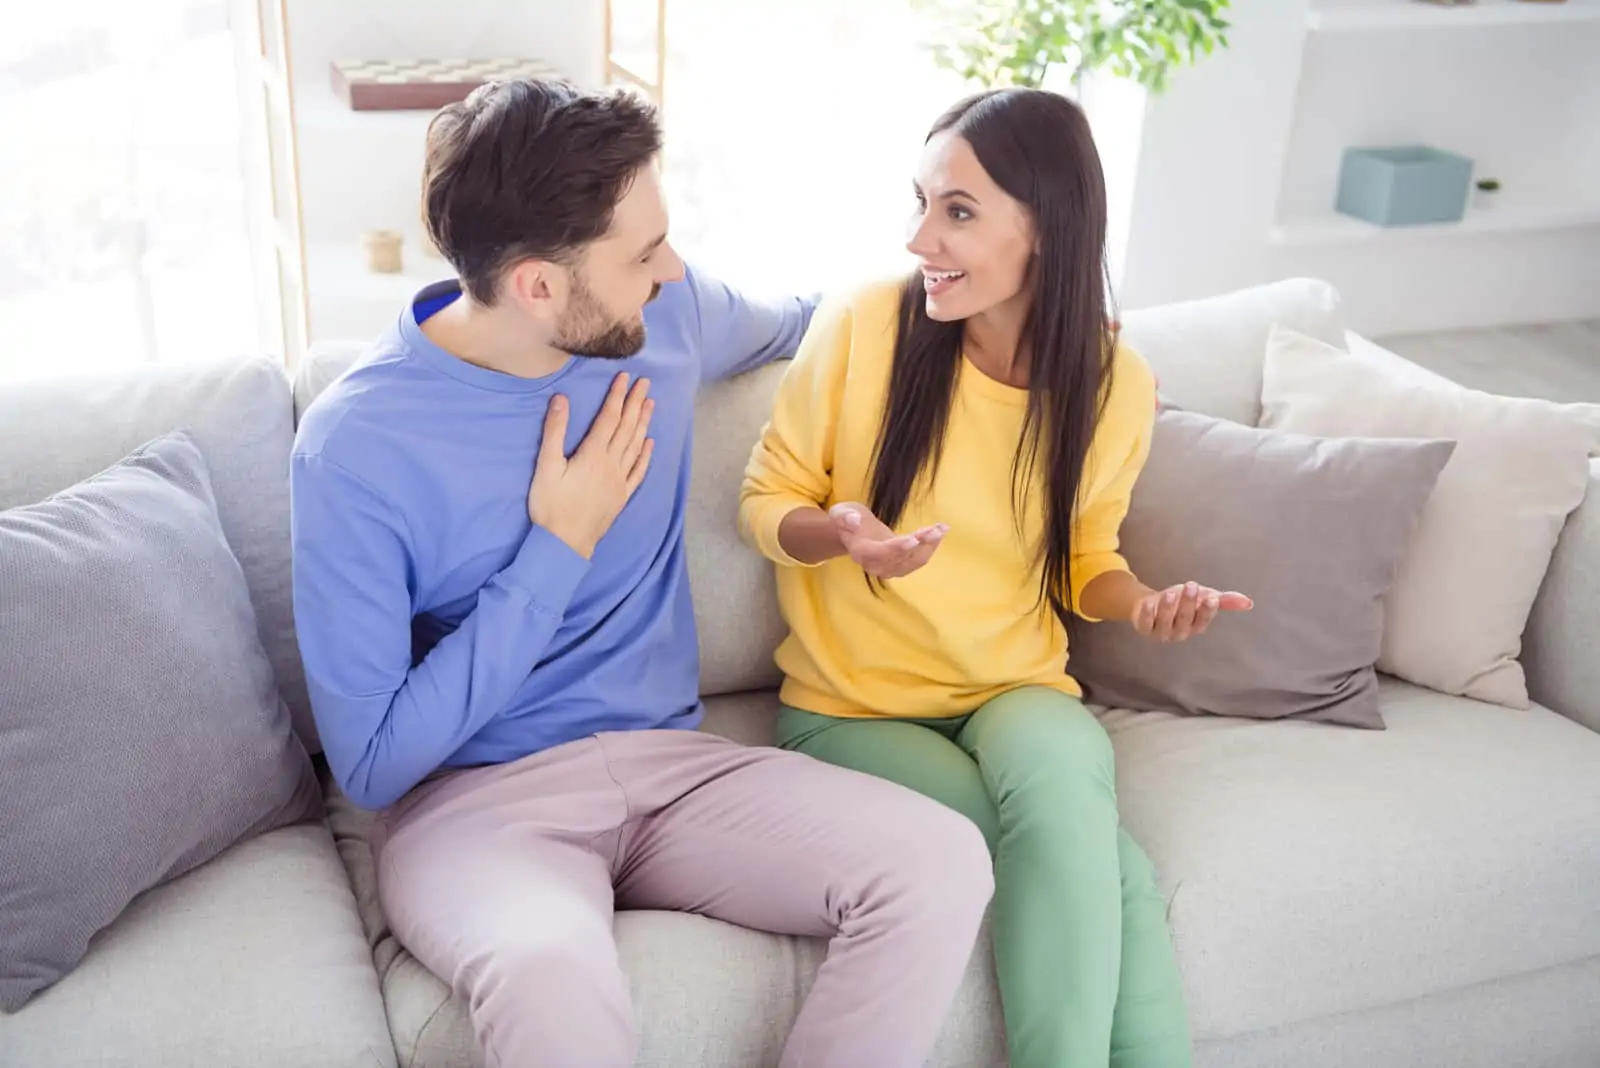 a smiling man and woman sit on the couch and talk